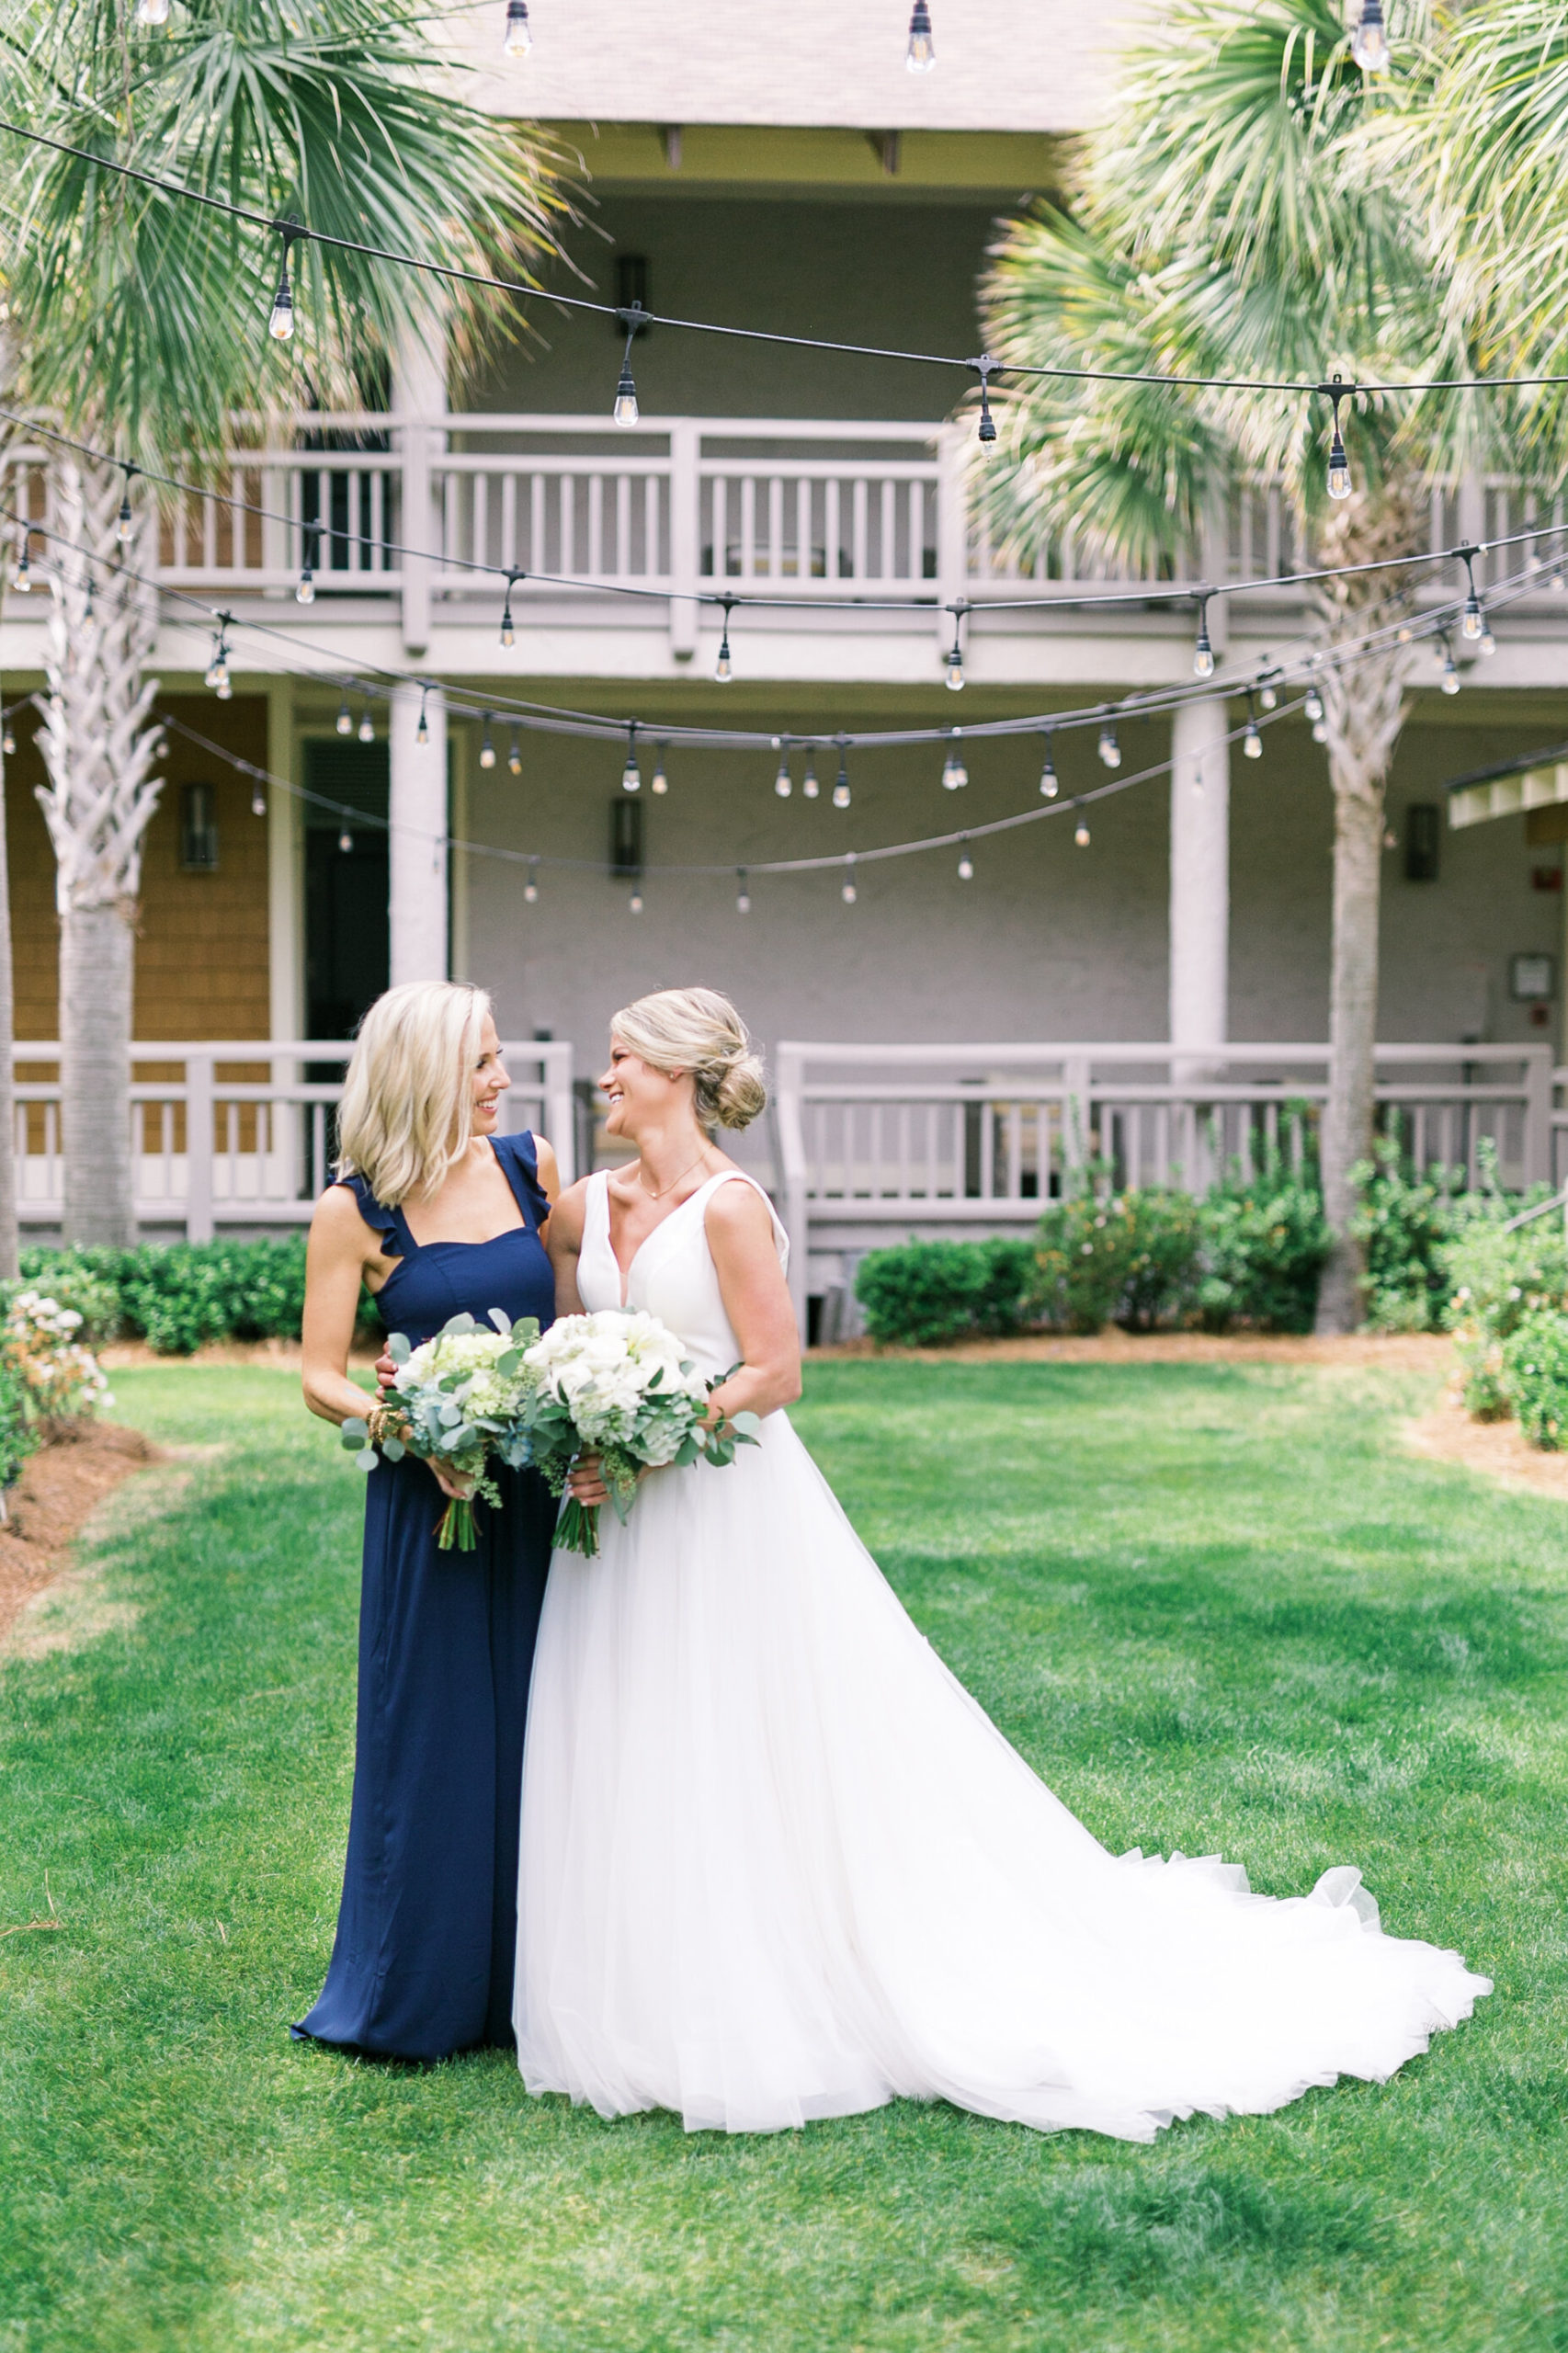 Bride with her maid of honor in Charleston, South Carolina wedding.